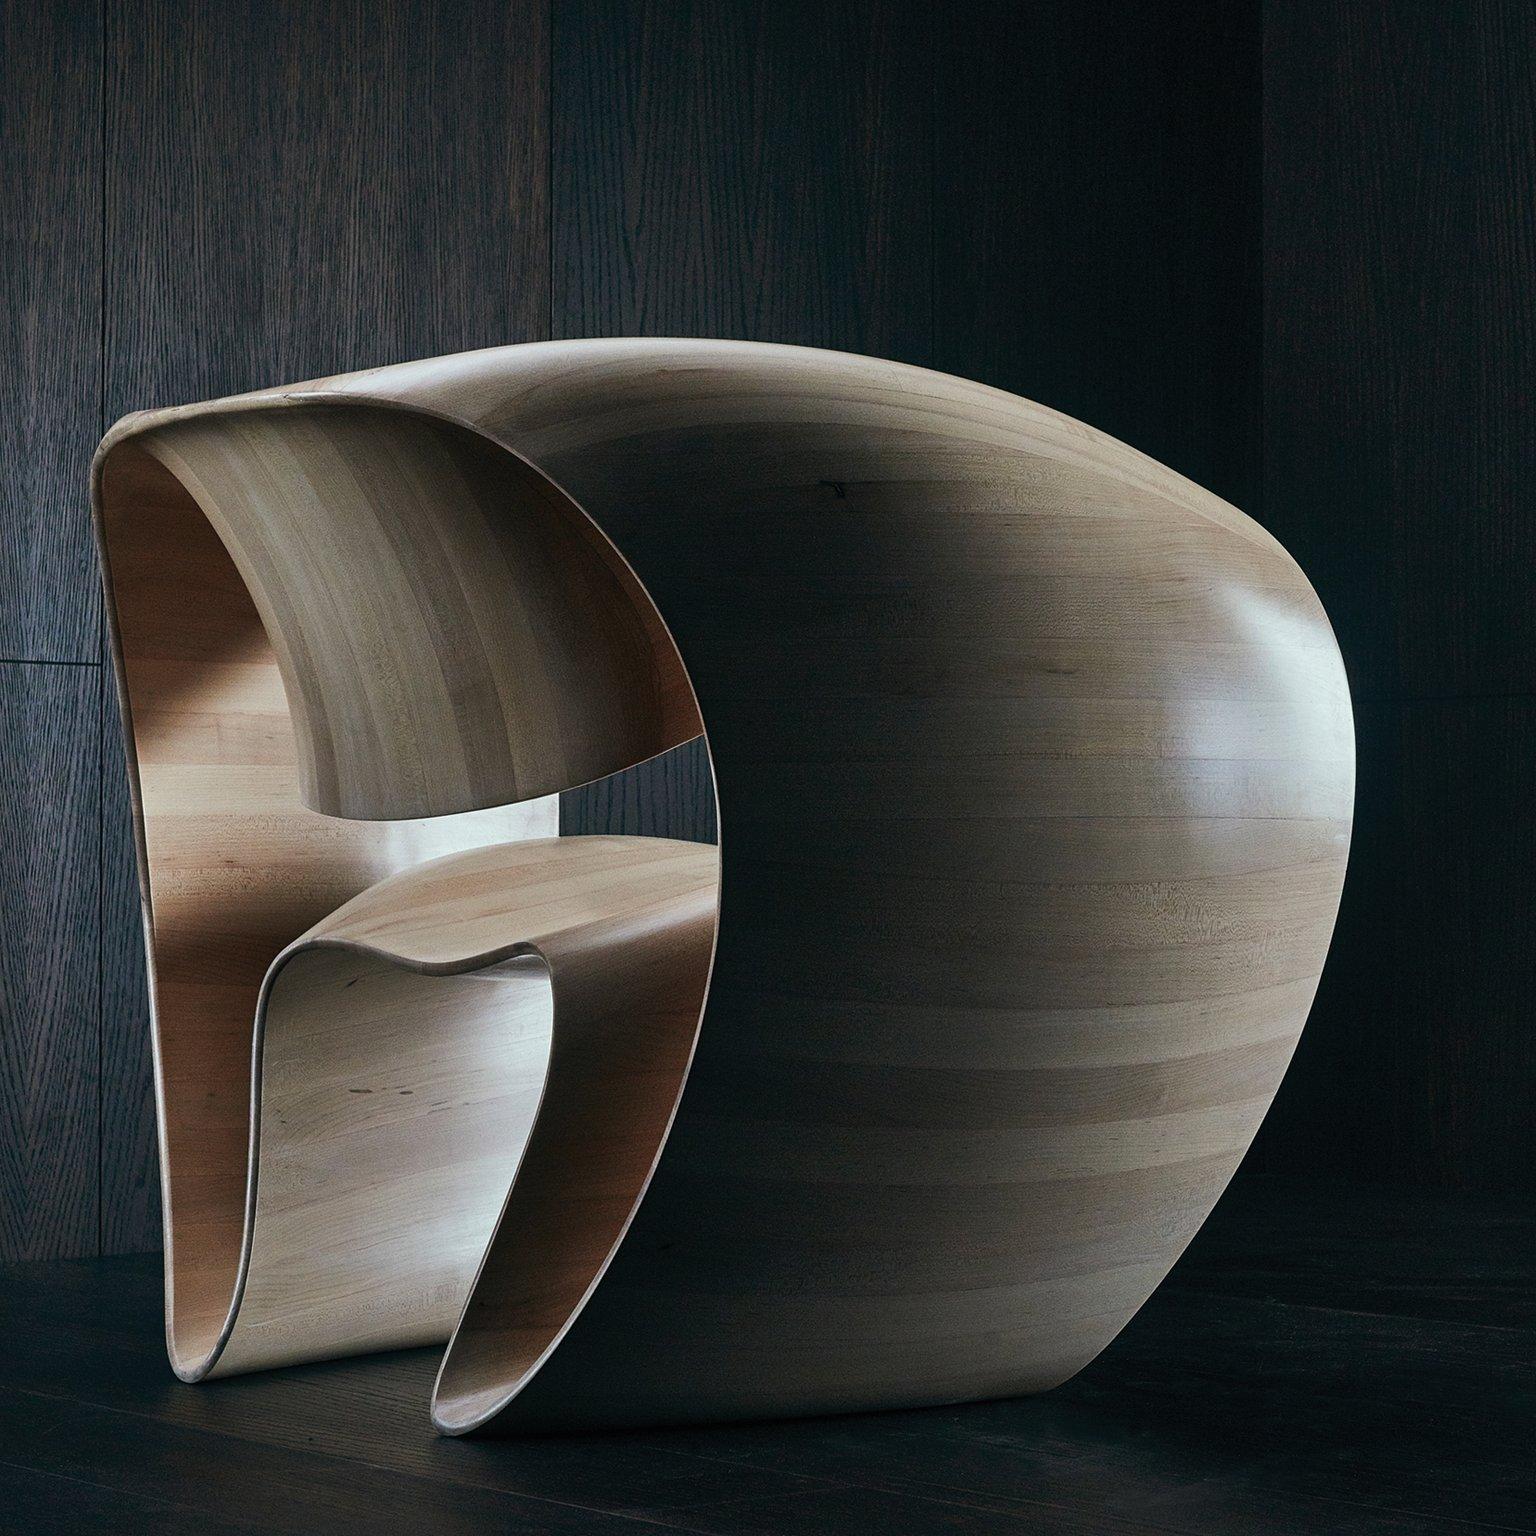 English Contemporary 'Ribbon' Chair in Arctic Maple by Object Studio For Sale